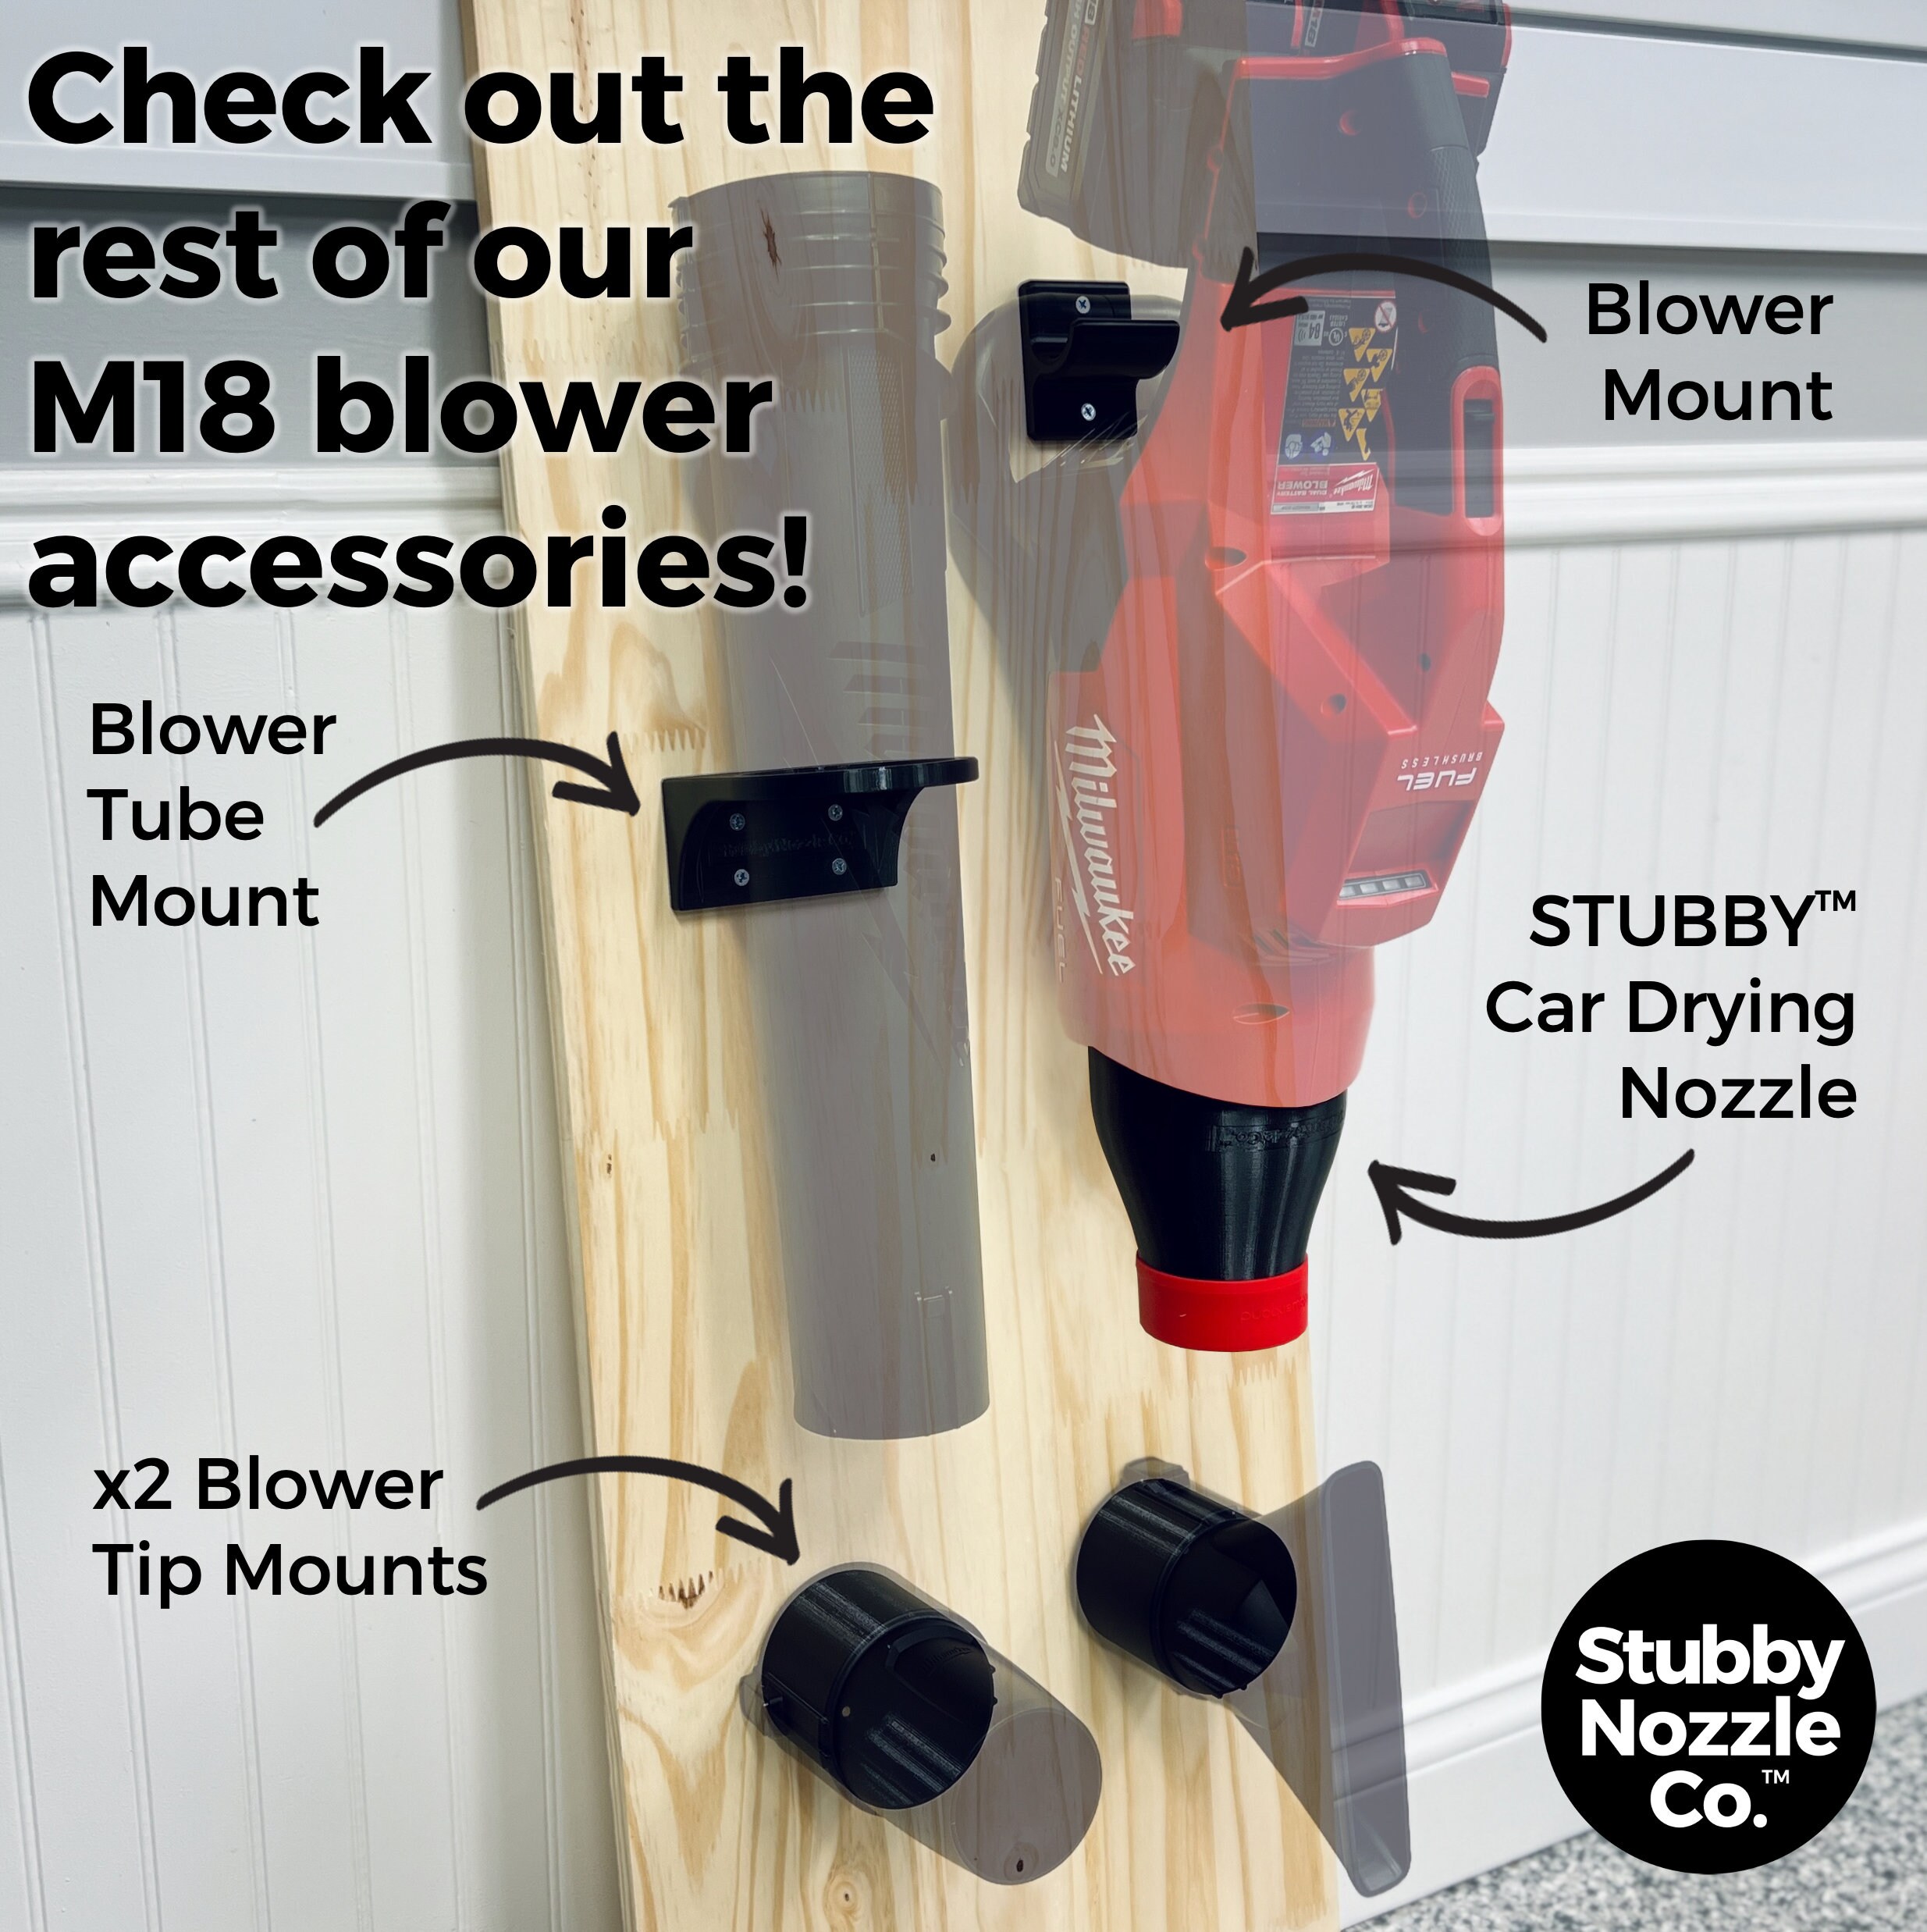 Stubby Nozzle Co. STUBBY™ Car Drying Nozzle for Milwaukee M18 FUEL